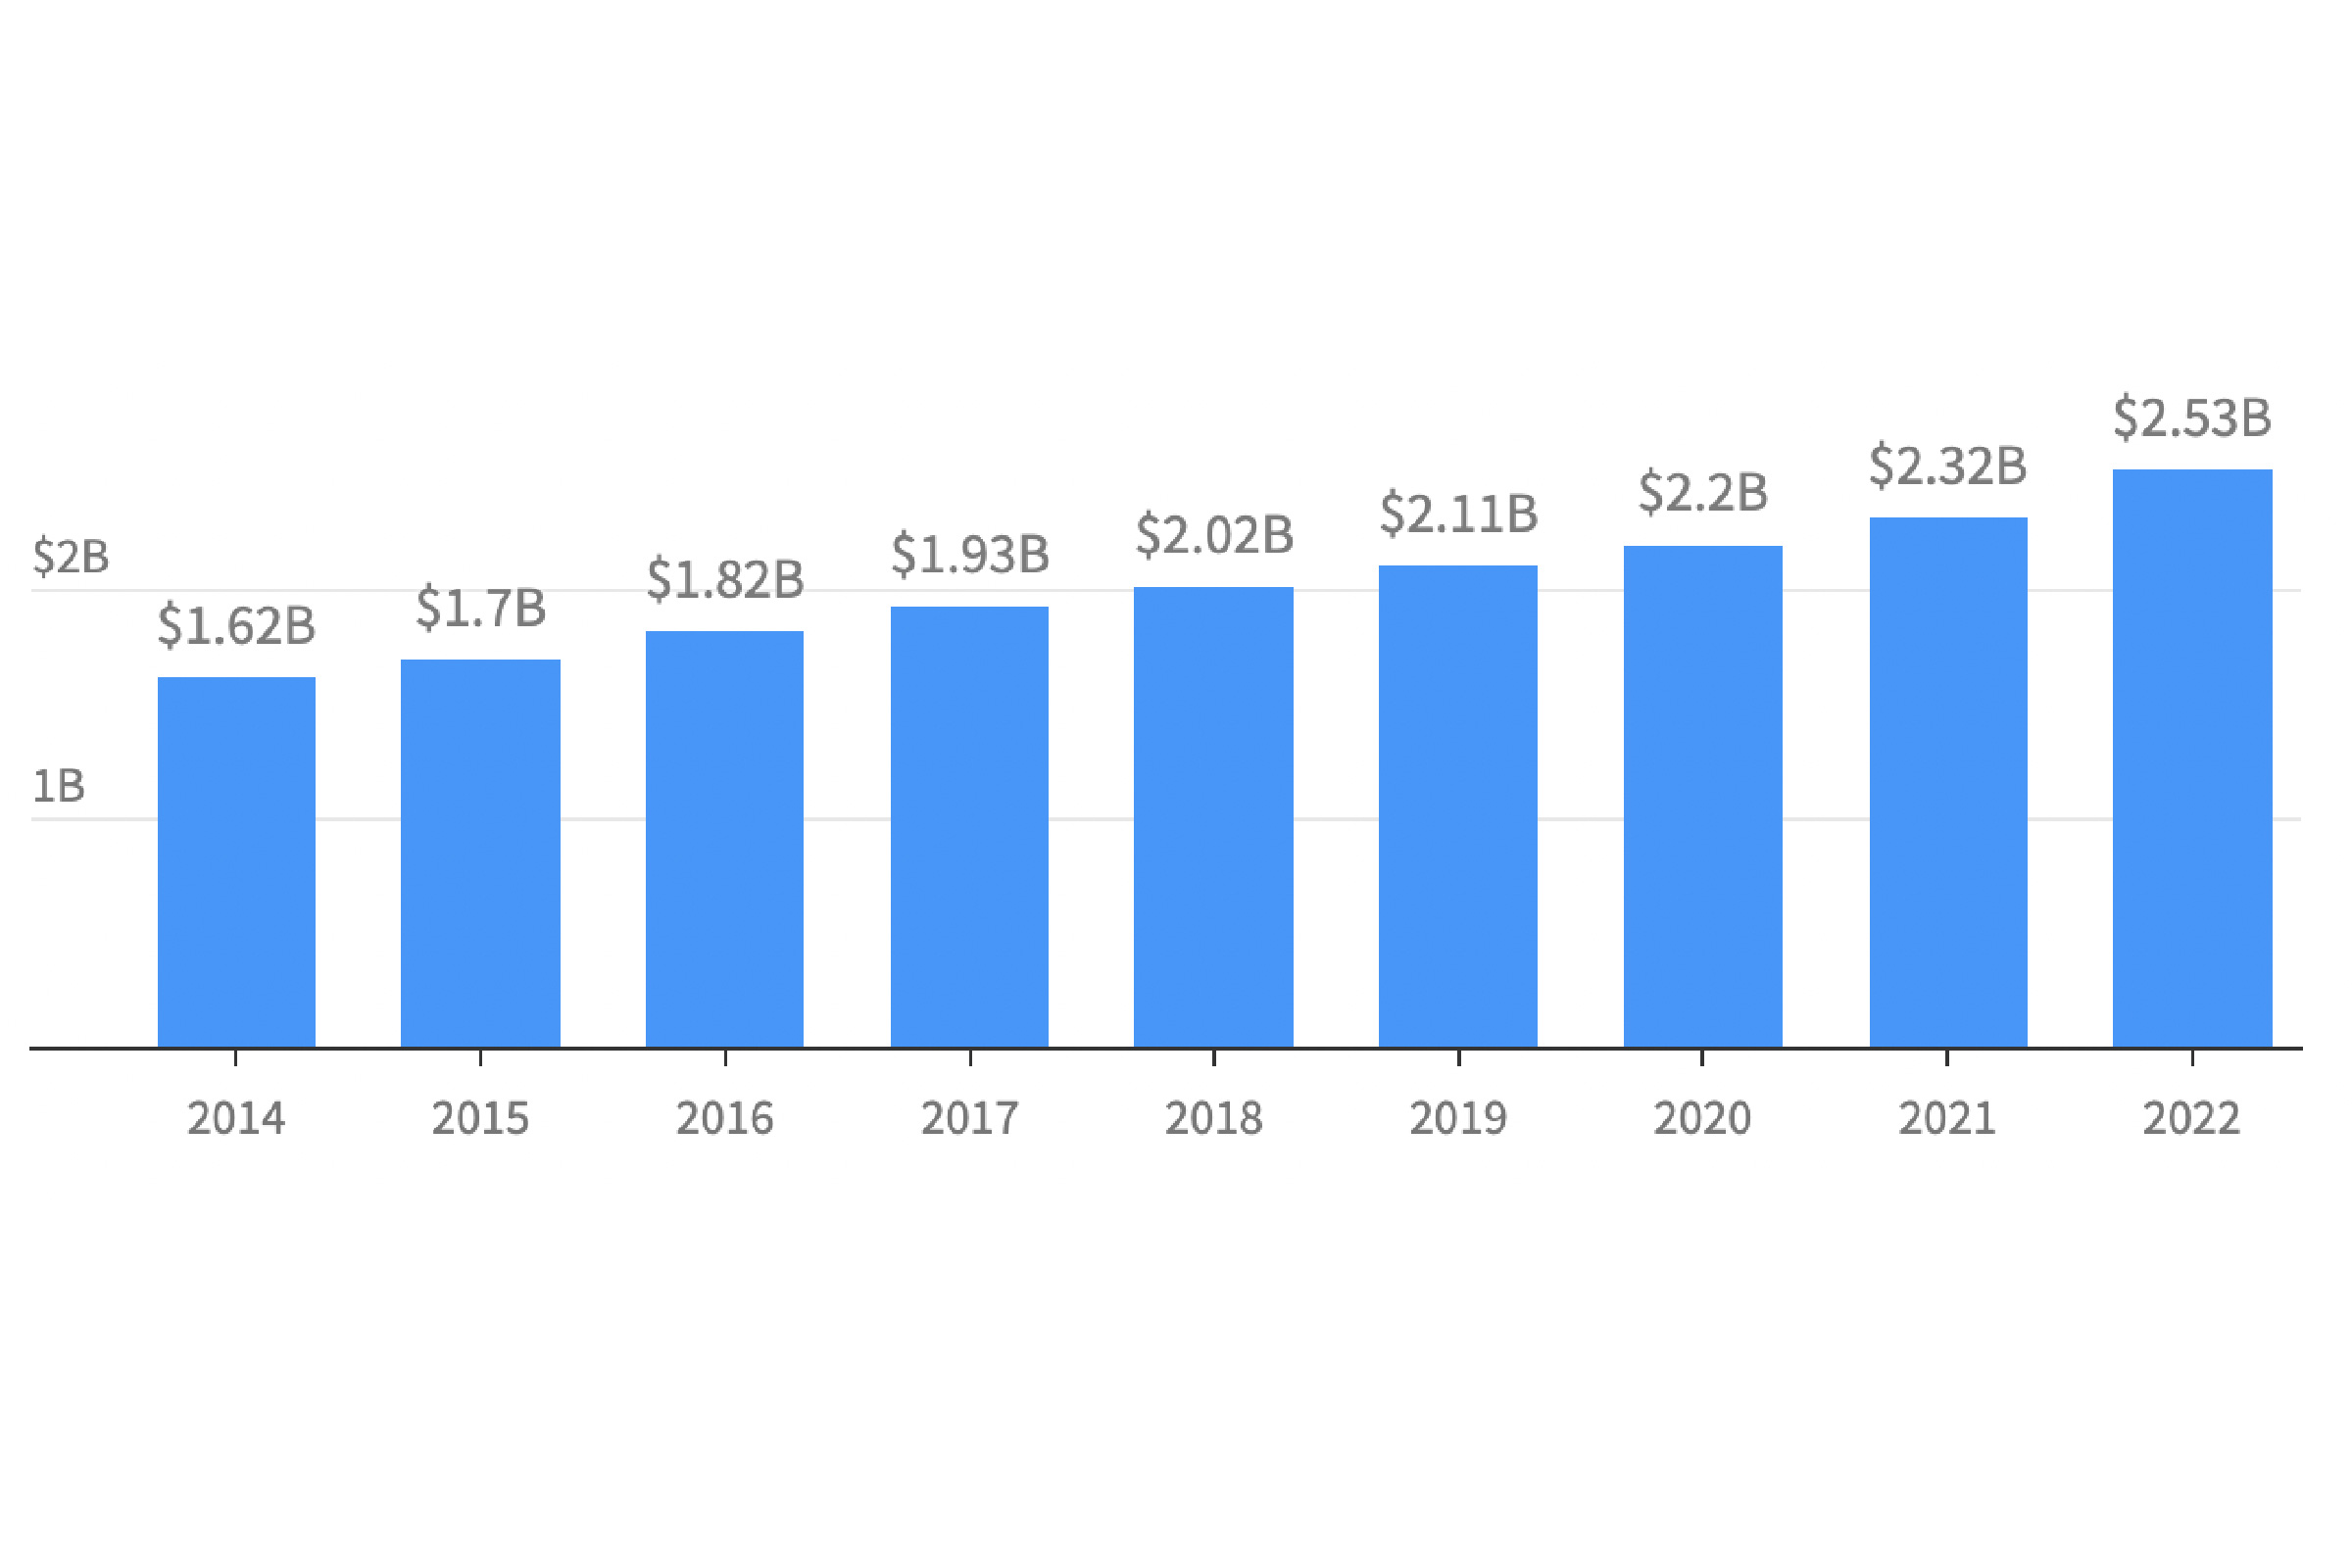 Bar chart showing Connecticut's pension spending by year, going back to 2014.